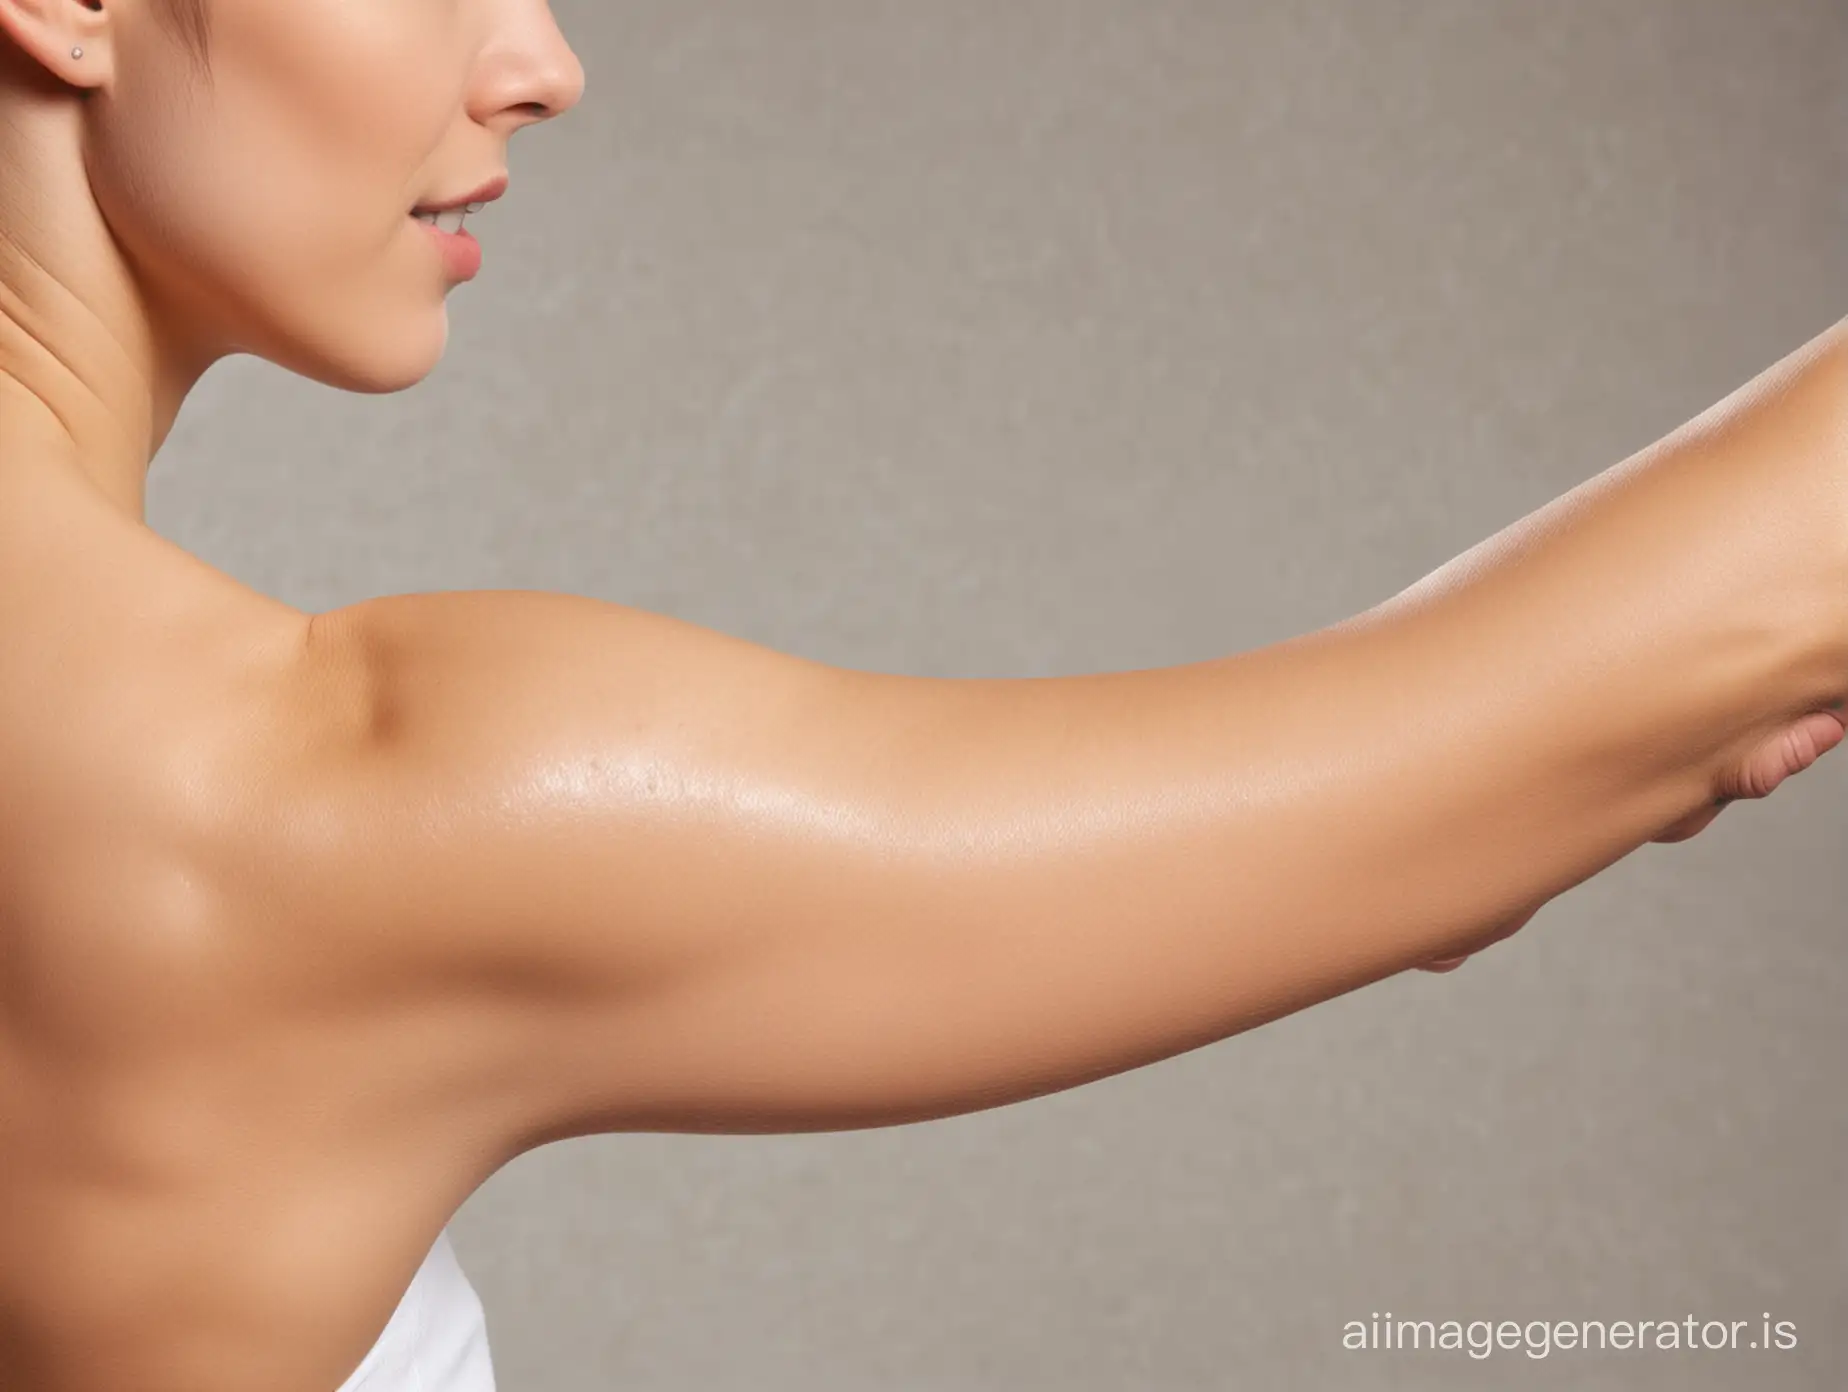 Remove hairs from arms